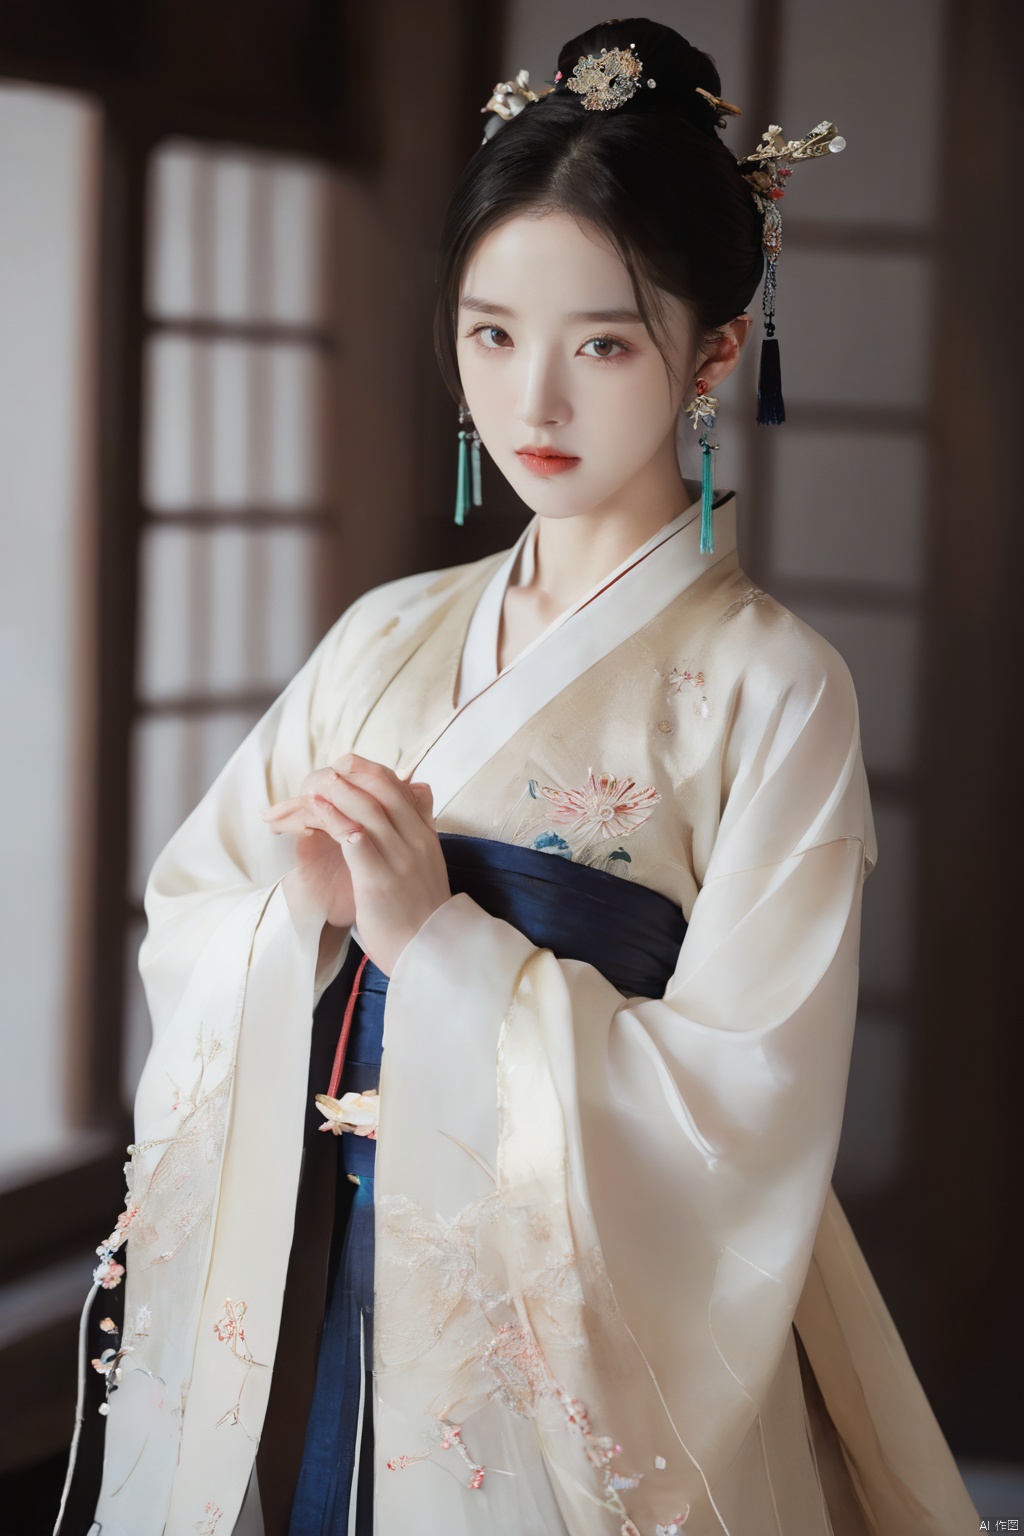  1.3, Masterpiece, Highest Quality, High Resolution, Details: 1.2, 1 Girl, Bun, Hairpin, Beautiful Face, Delicate Eyes, Tassel Earrings, Necklaces, Bracelets, Hanfu, Su Embroidered Hanfu, Streamers, Ribbons, Elegant Stand Posture, Aesthetics, Movie Lighting, Ray Tracing, Depth of Field, Layering,Fluttering, Hanfu, qingsha
Negative Prompt：ugly, tiling, poorly drawn hands, poorly drawn feet, poorly drawn face, out of frame, extra limbs, disfigured, deformed, body out of frame, bad anatomy, watermark, signature, cut off, low contrast, underexposed, overexposed, bad art, beginner, *******, distorted face